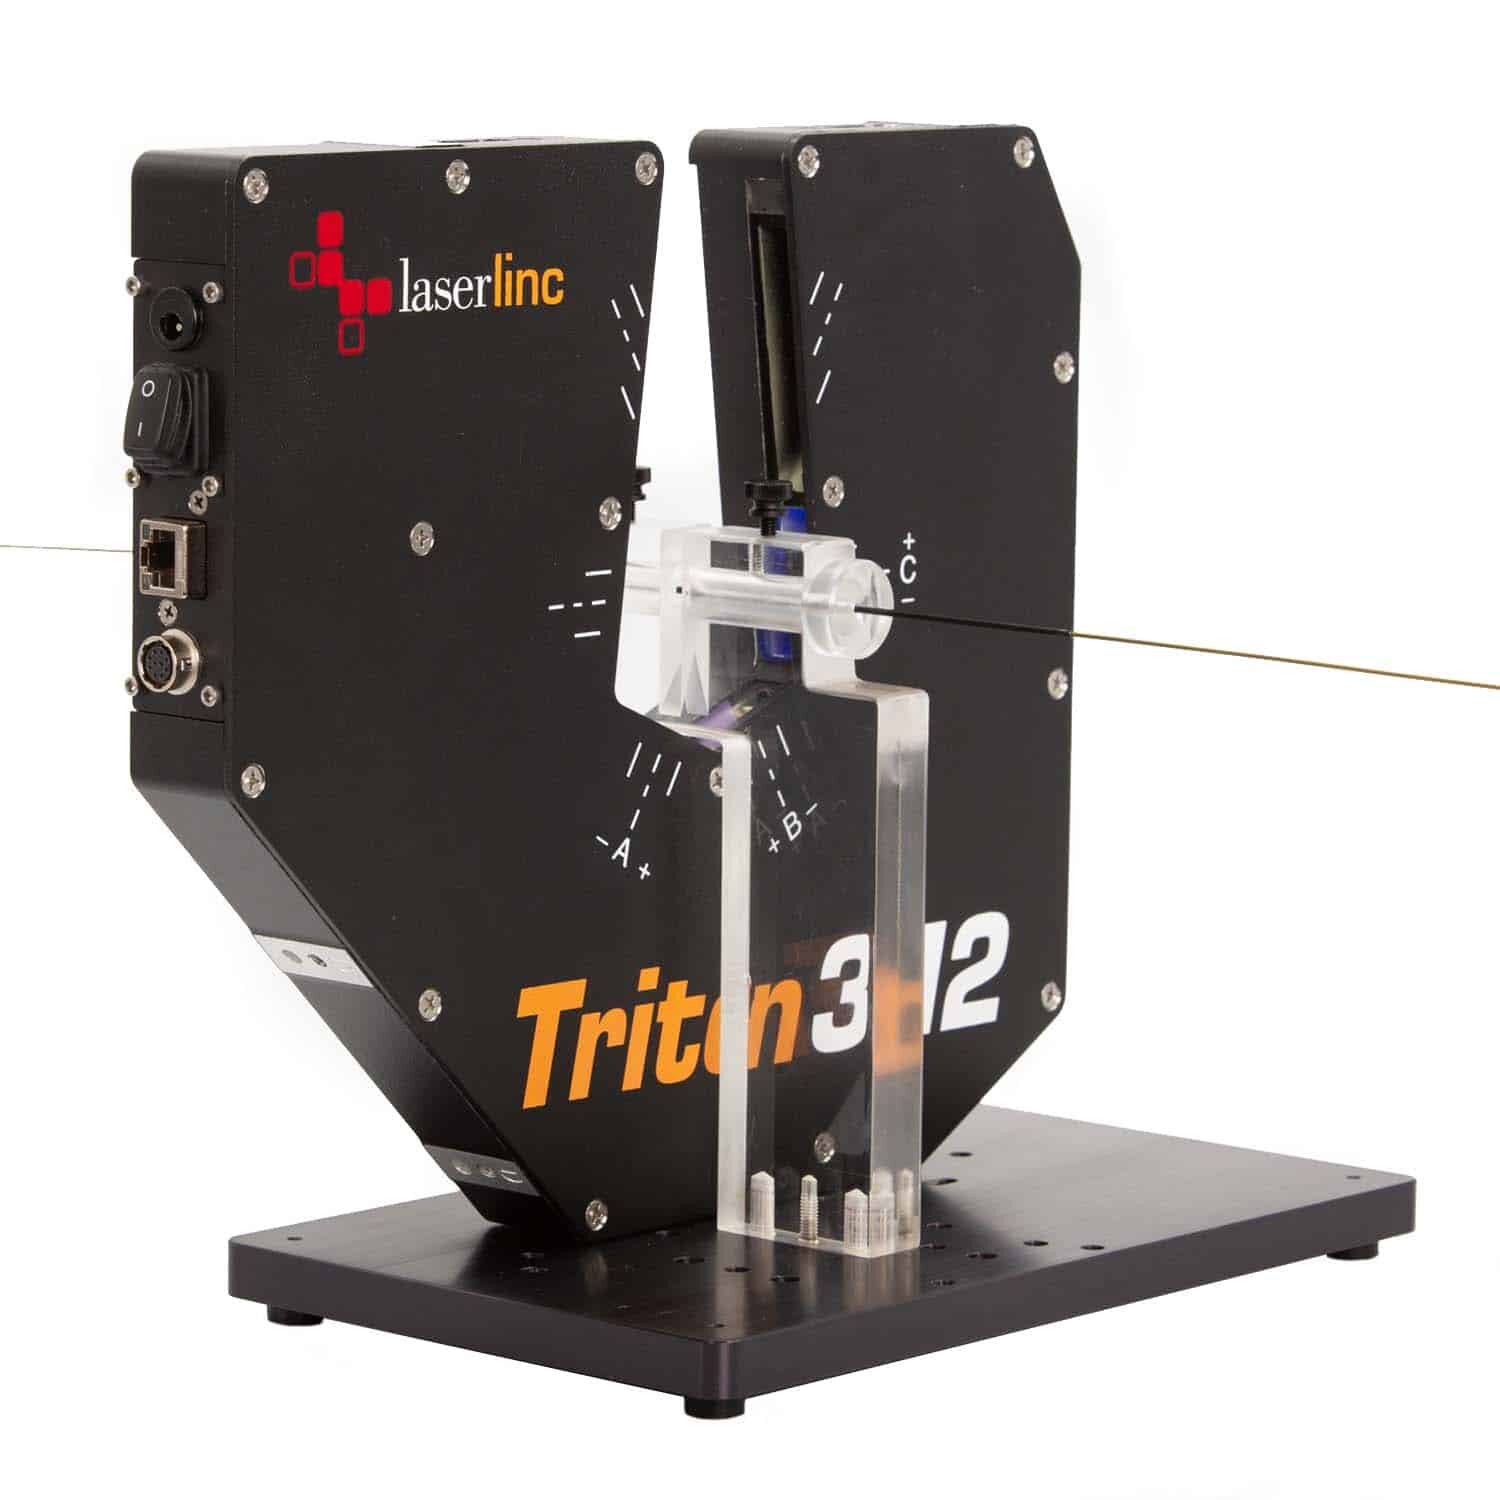   Triton 312 with Feed-Through Guide Block